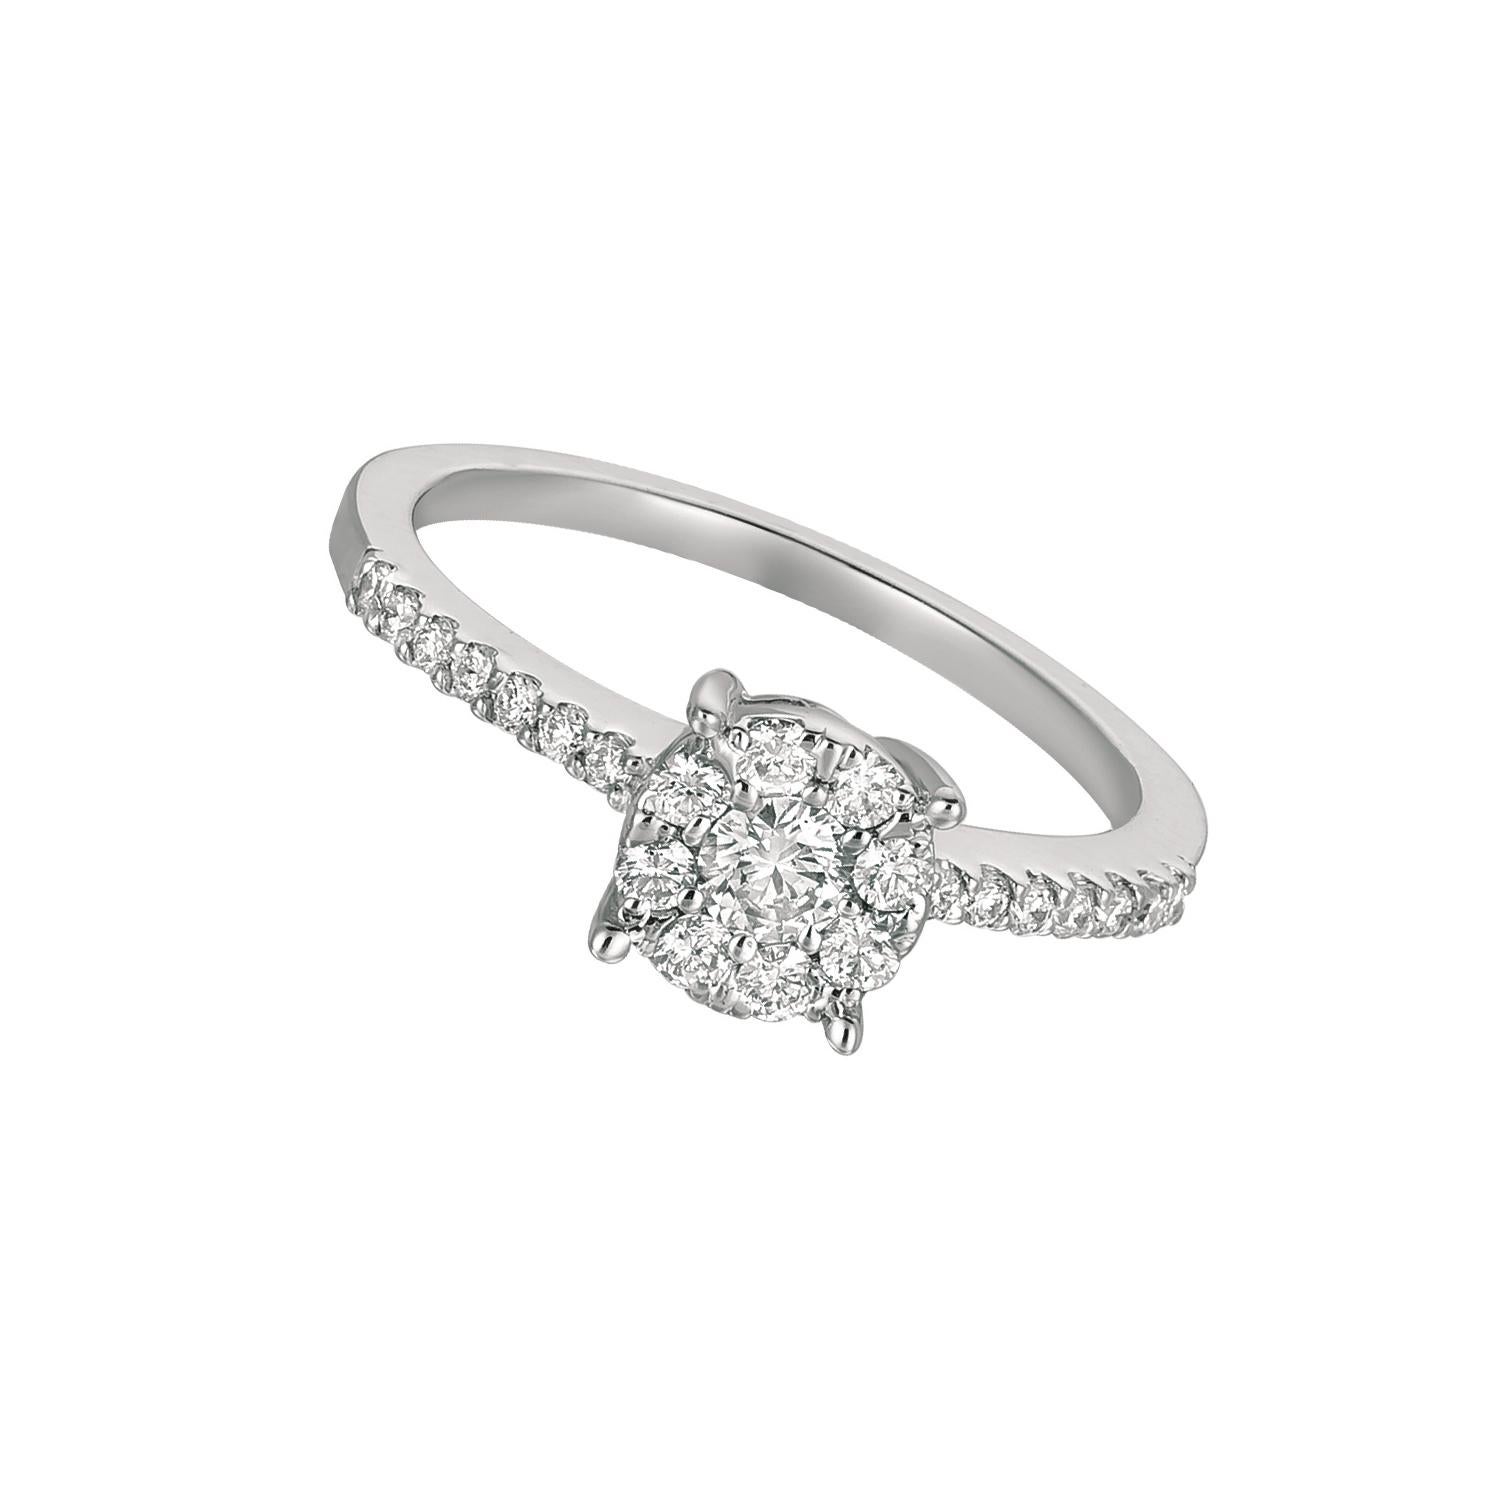 0.50 Carat Natural Diamond Engagement Ring G SI 14K White Gold

100% Natural Diamonds, Not Enhanced in any way Round Cut Diamond Ring
0.50CT
G-H 
SI  
14K White Gold  Prong style    2.4 grams
5/16 inch in width
1 diamond - 0.16ct, 22 diamonds -